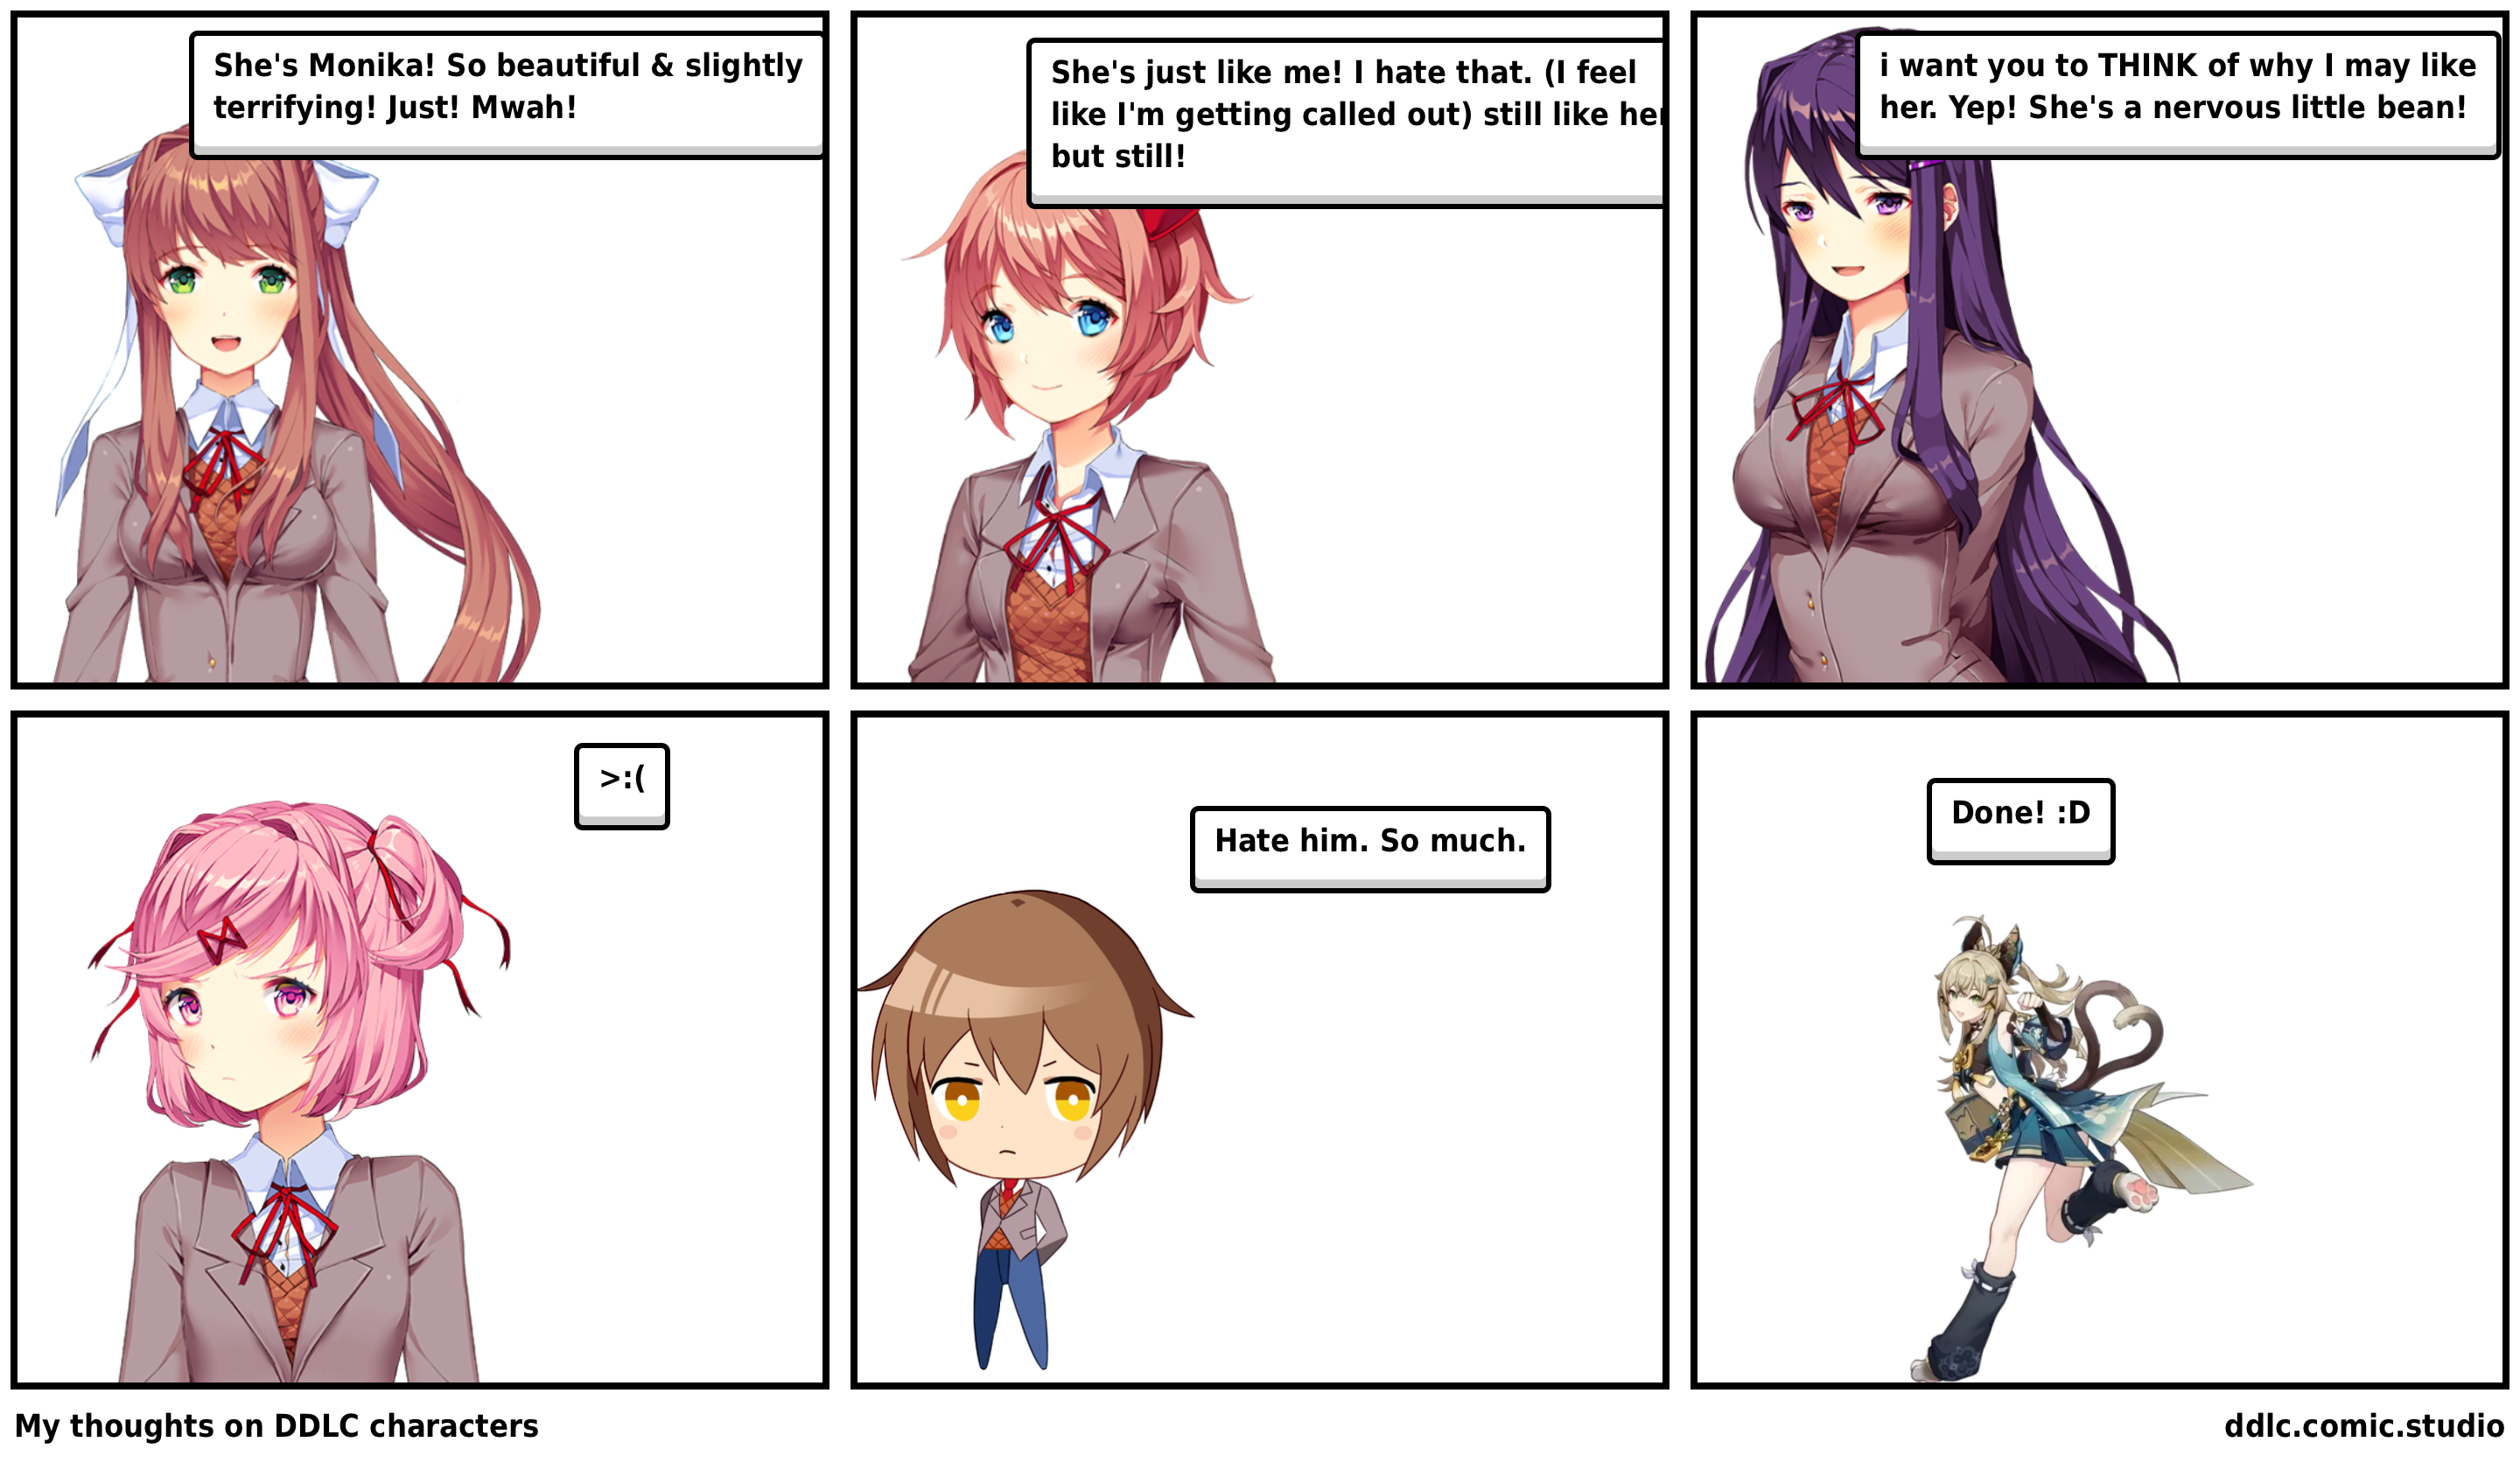 My thoughts on DDLC characters